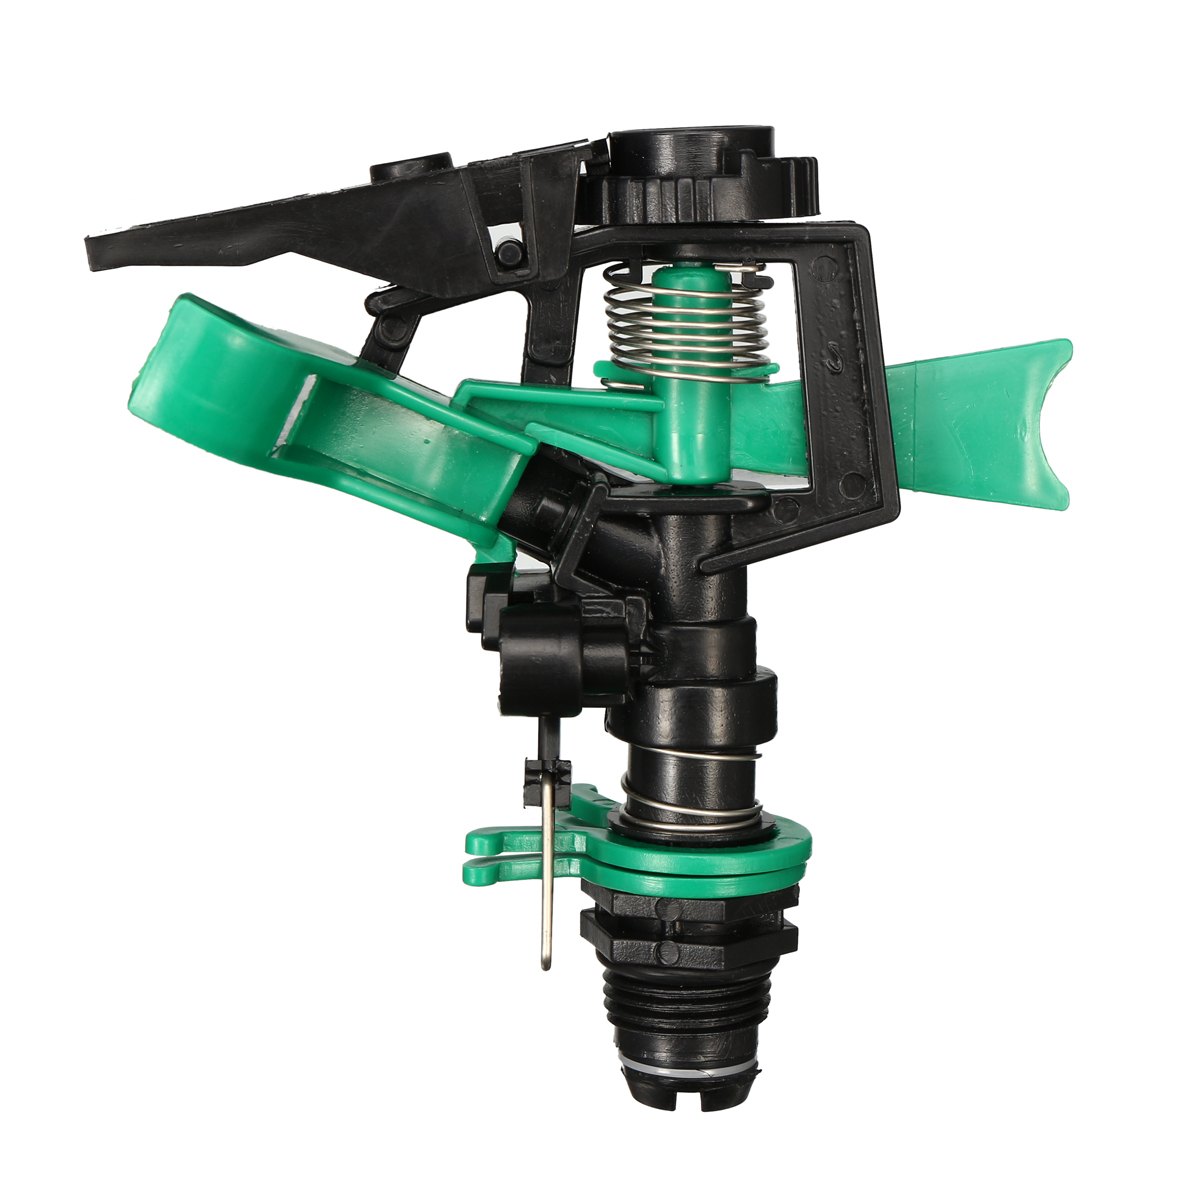 H-Base-Plastic-Auto-Rotating-Lawn-Sprinkler-Garden-Lawn-Plant-Grass-Watering-Tool-1558817-7